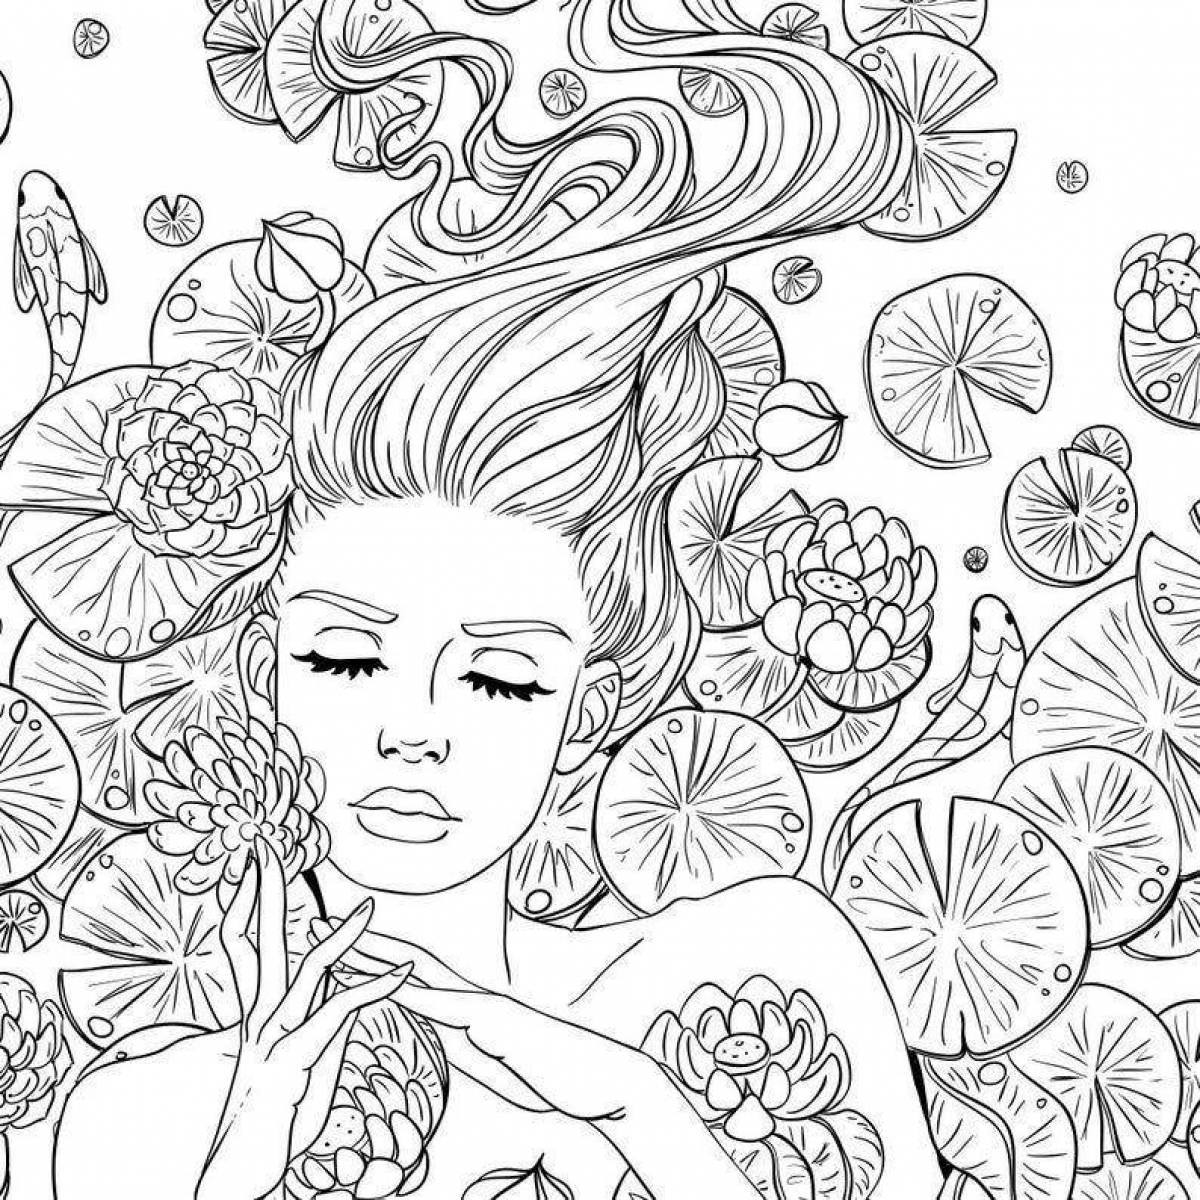 A fascinating coloring book for girls aged 14-15